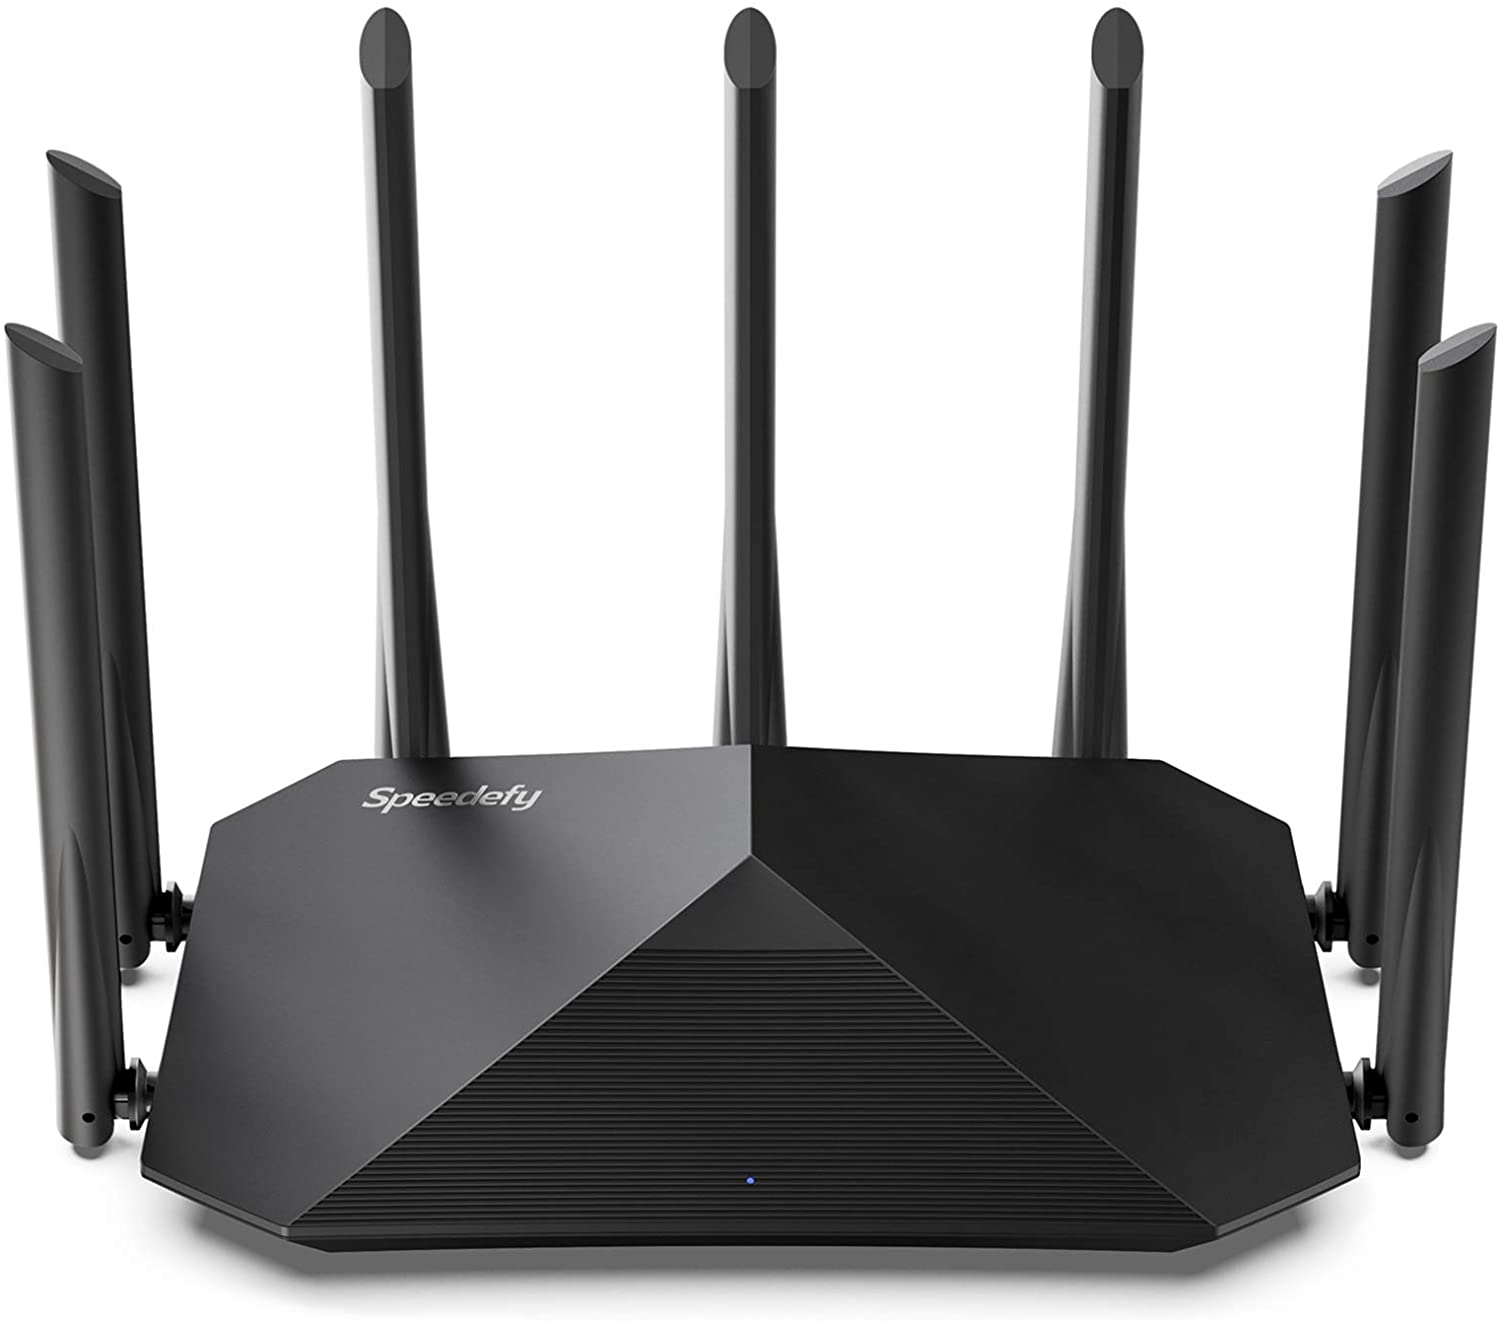 Amazon.com: Speedefy AC2100 Smart WiFi Router - Dual Band Gigabit Wireless  Router for Home & Gaming, 4x4 MU-MIMO, 7x6dBi External Antennas for Strong  Signal, Parental Control, Support IPv6 (Model K7) : Electronics